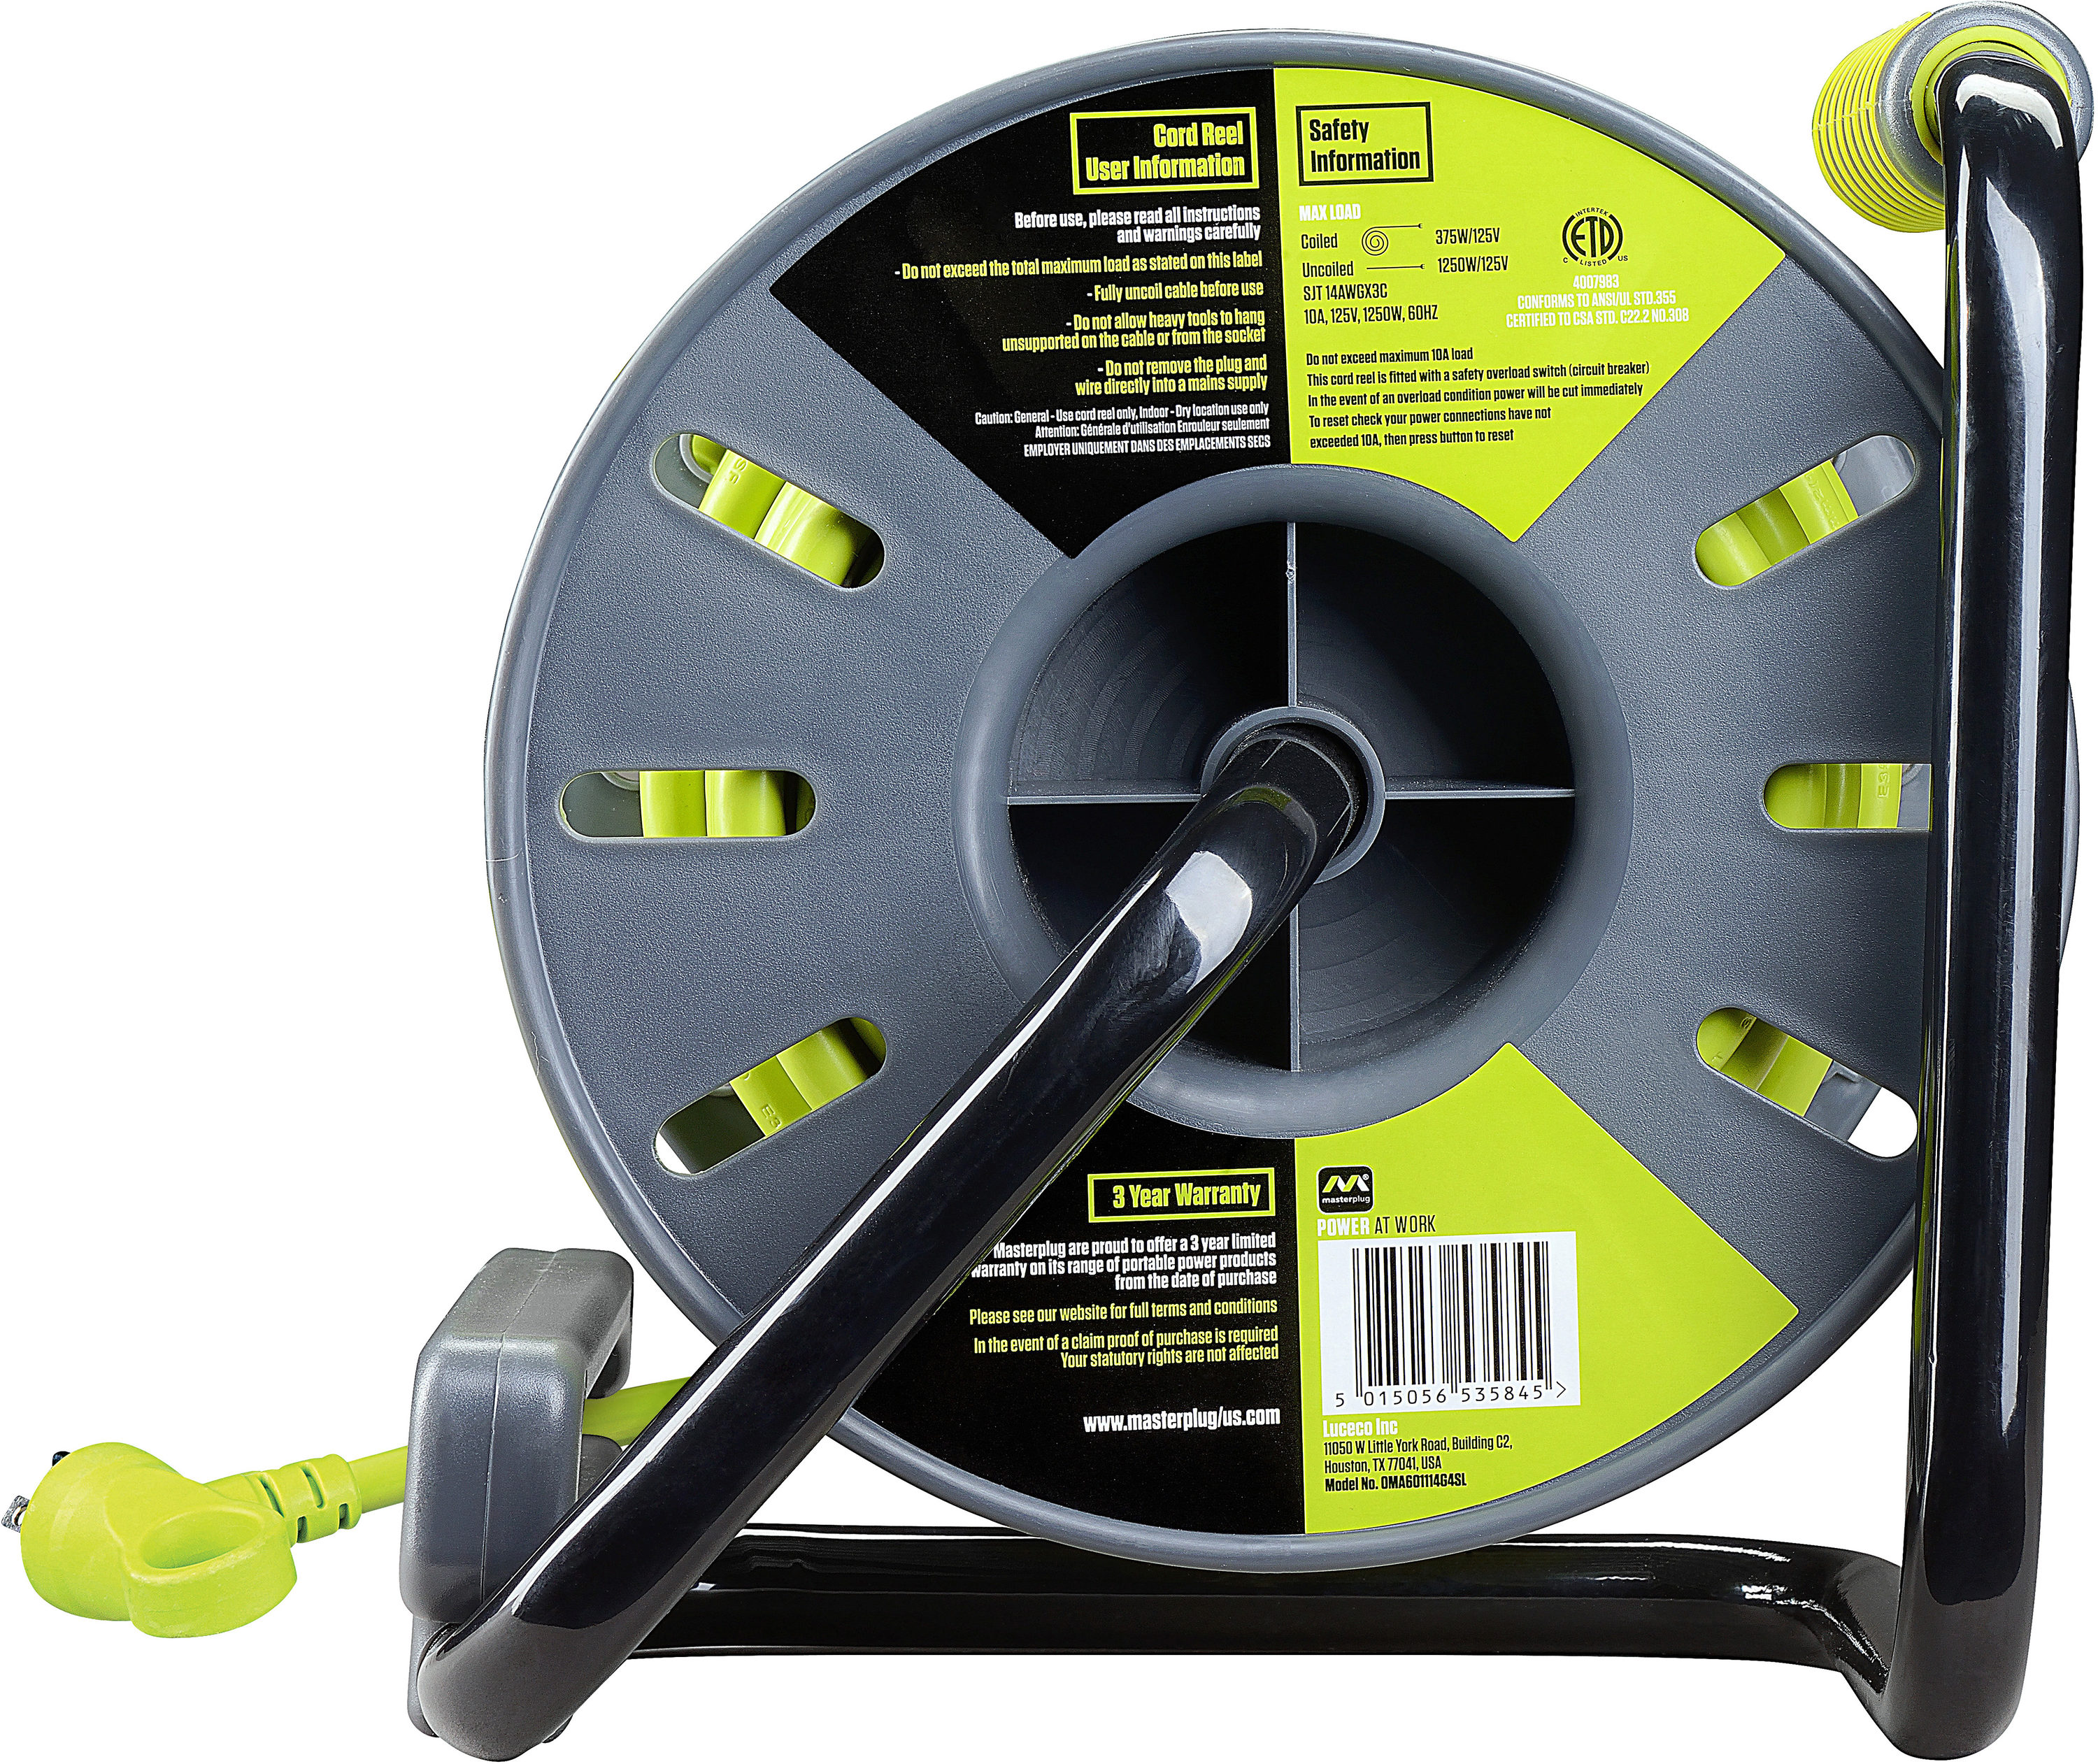 Masterplug 100' Heavy Duty Extension Cord Reel with Wall Mounting